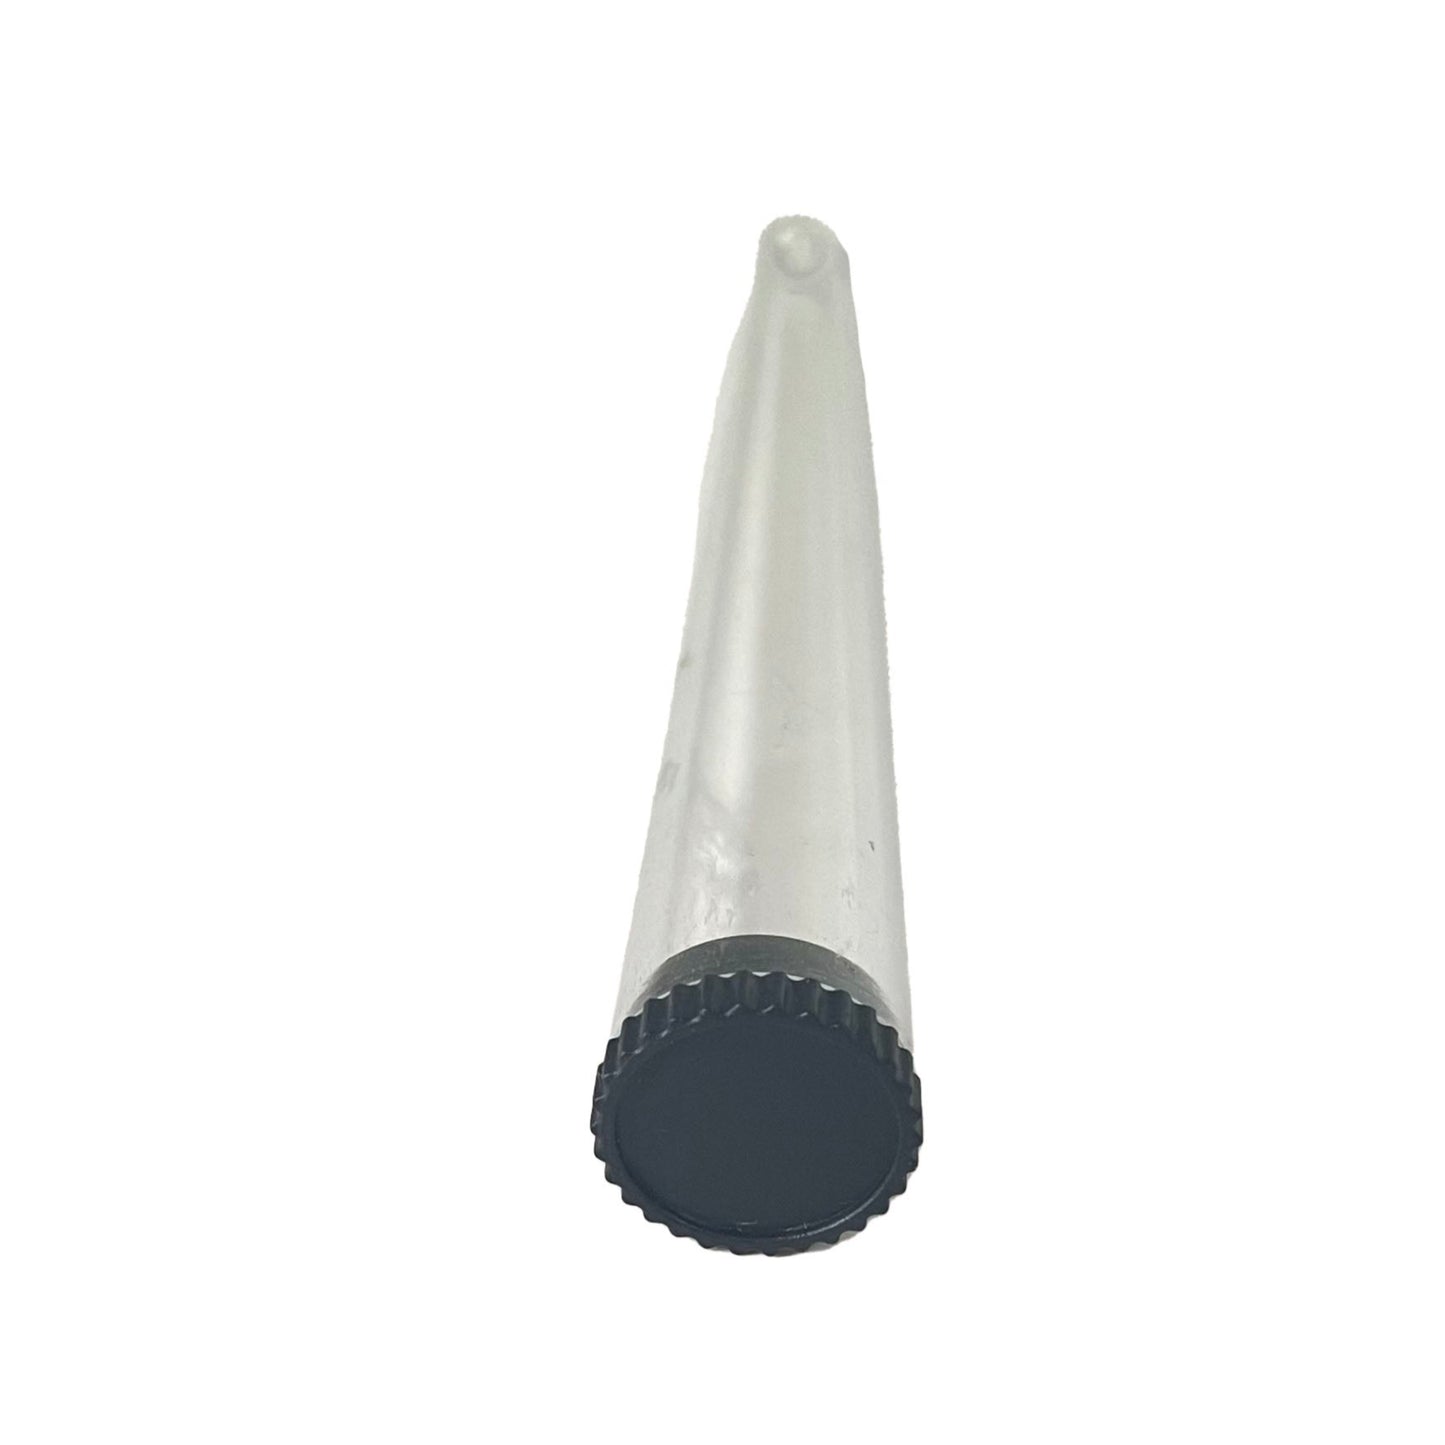 109mm PS Cone-Tube